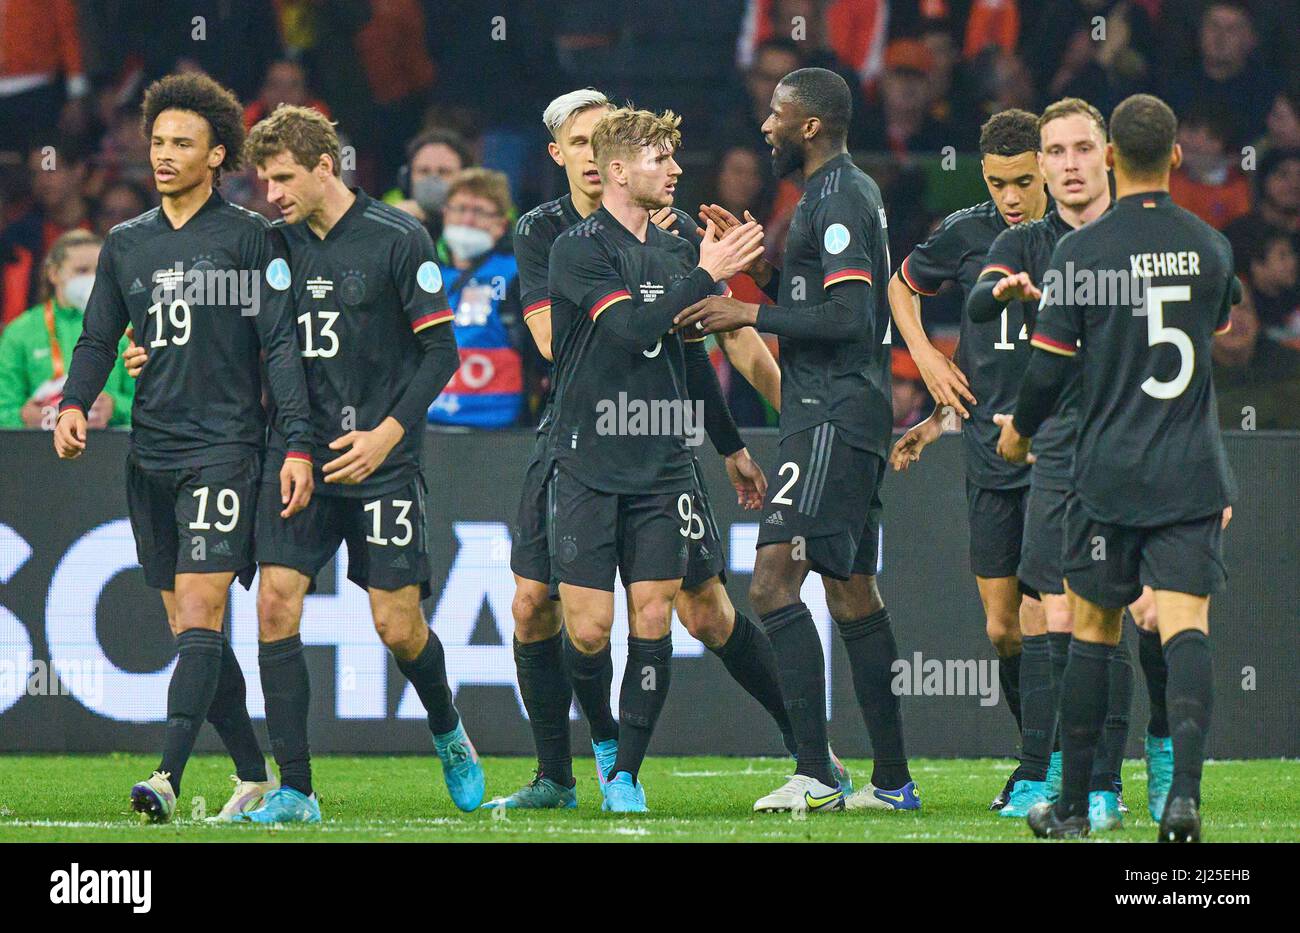 Amsterdam, Netherlands. 29th Mar, 2022. Thomas Müller, DFB 13 celebrates his goal, happy, laugh, celebration, 0-1 with Leroy SANE, DFB 19 Timo Werner, DFB 9 Antonio Rüdiger, Ruediger, DFB 2 Nico Schlotterbeck, DFB 23 Jamal Musiala, DFB 14 David Raum, DFB 3 Thilo Kehrer, DFB 5  in the friendly match NETHERLANDS - GERMANY 1-1 Preparation for World Championships 2022 in Qatar ,Season 2021/2022, on Mar 29, 2022  in Amsterdam, Netherlands.  © Peter Schatz / Alamy Live News Credit: Peter Schatz/Alamy Live News Stock Photo